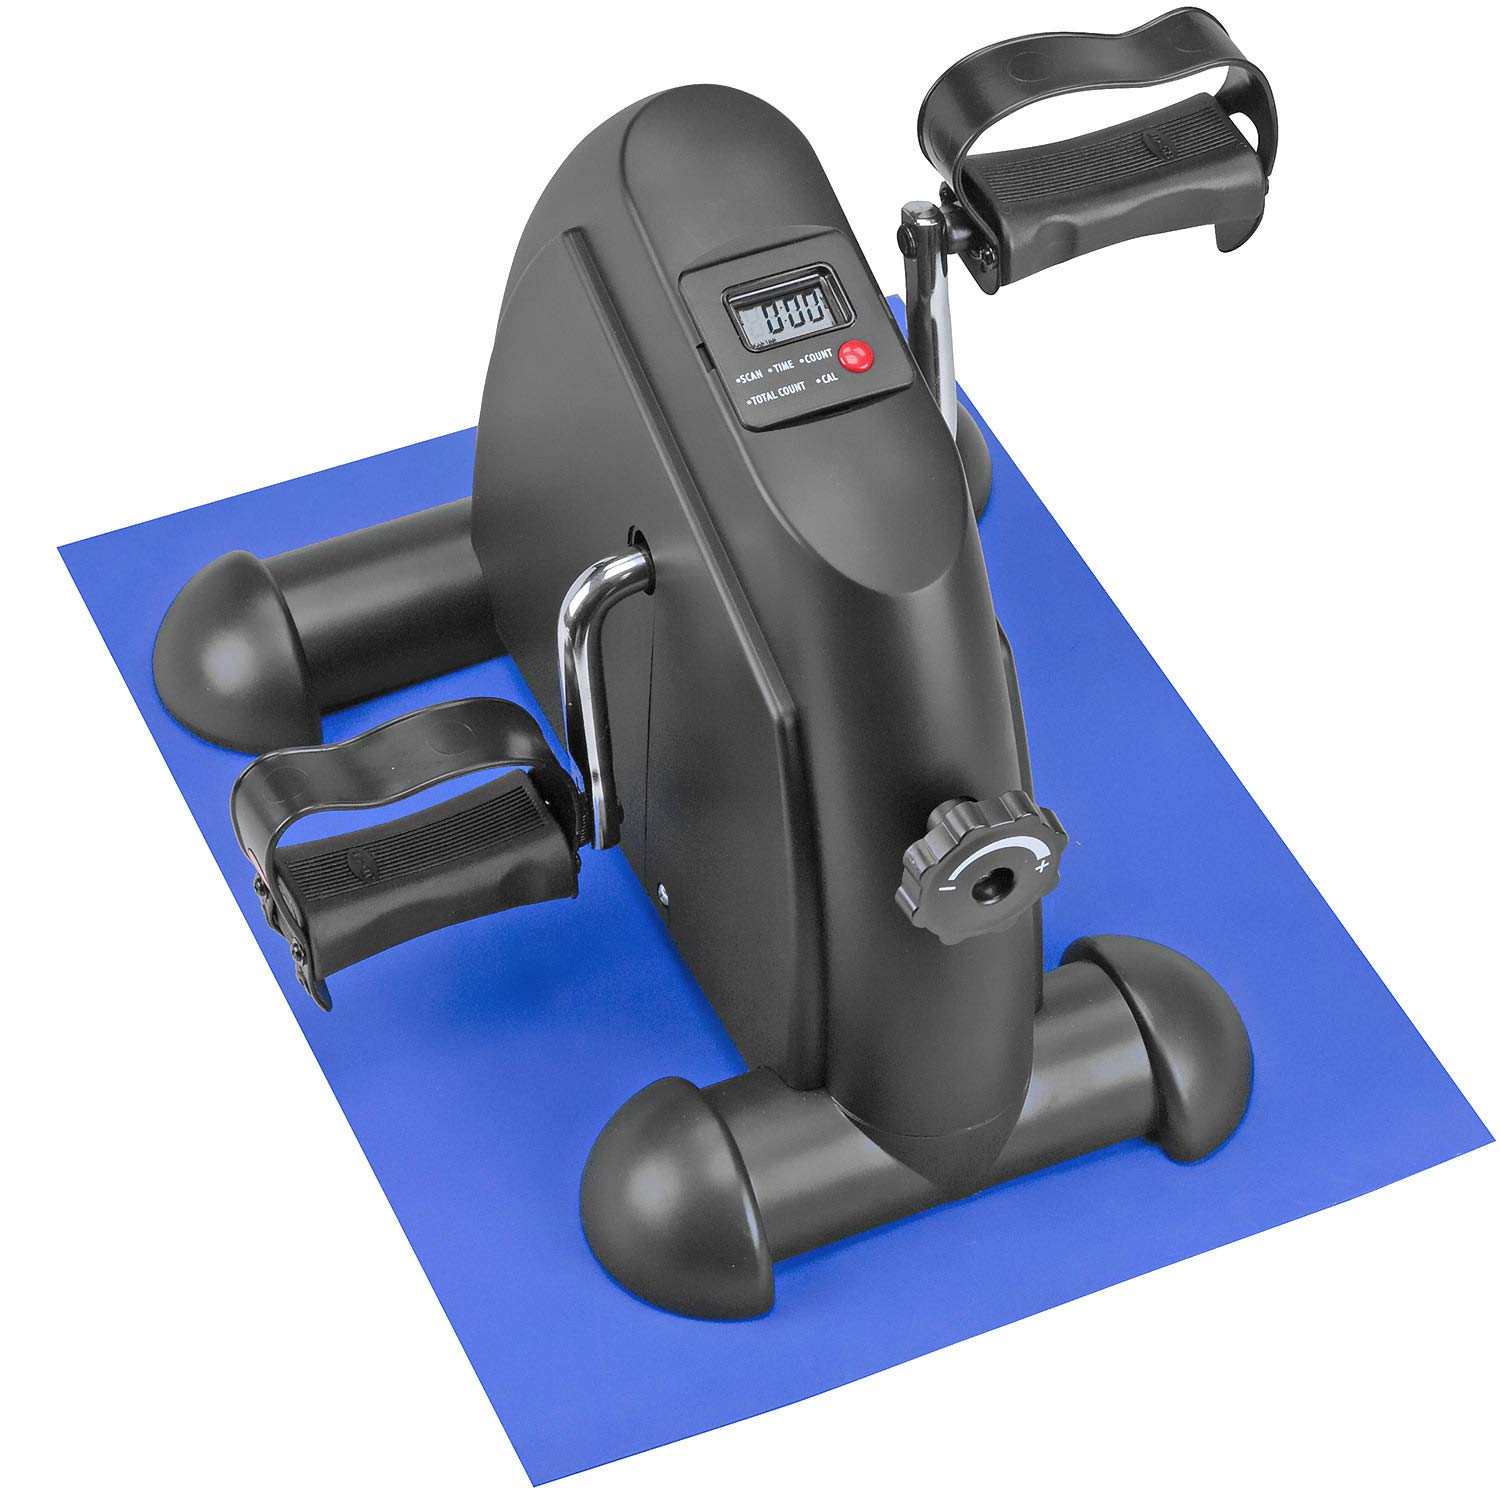 DMI Mini Exercise Bike Mini Fitness Cycle with Mat by MABIS DMI Healthcare